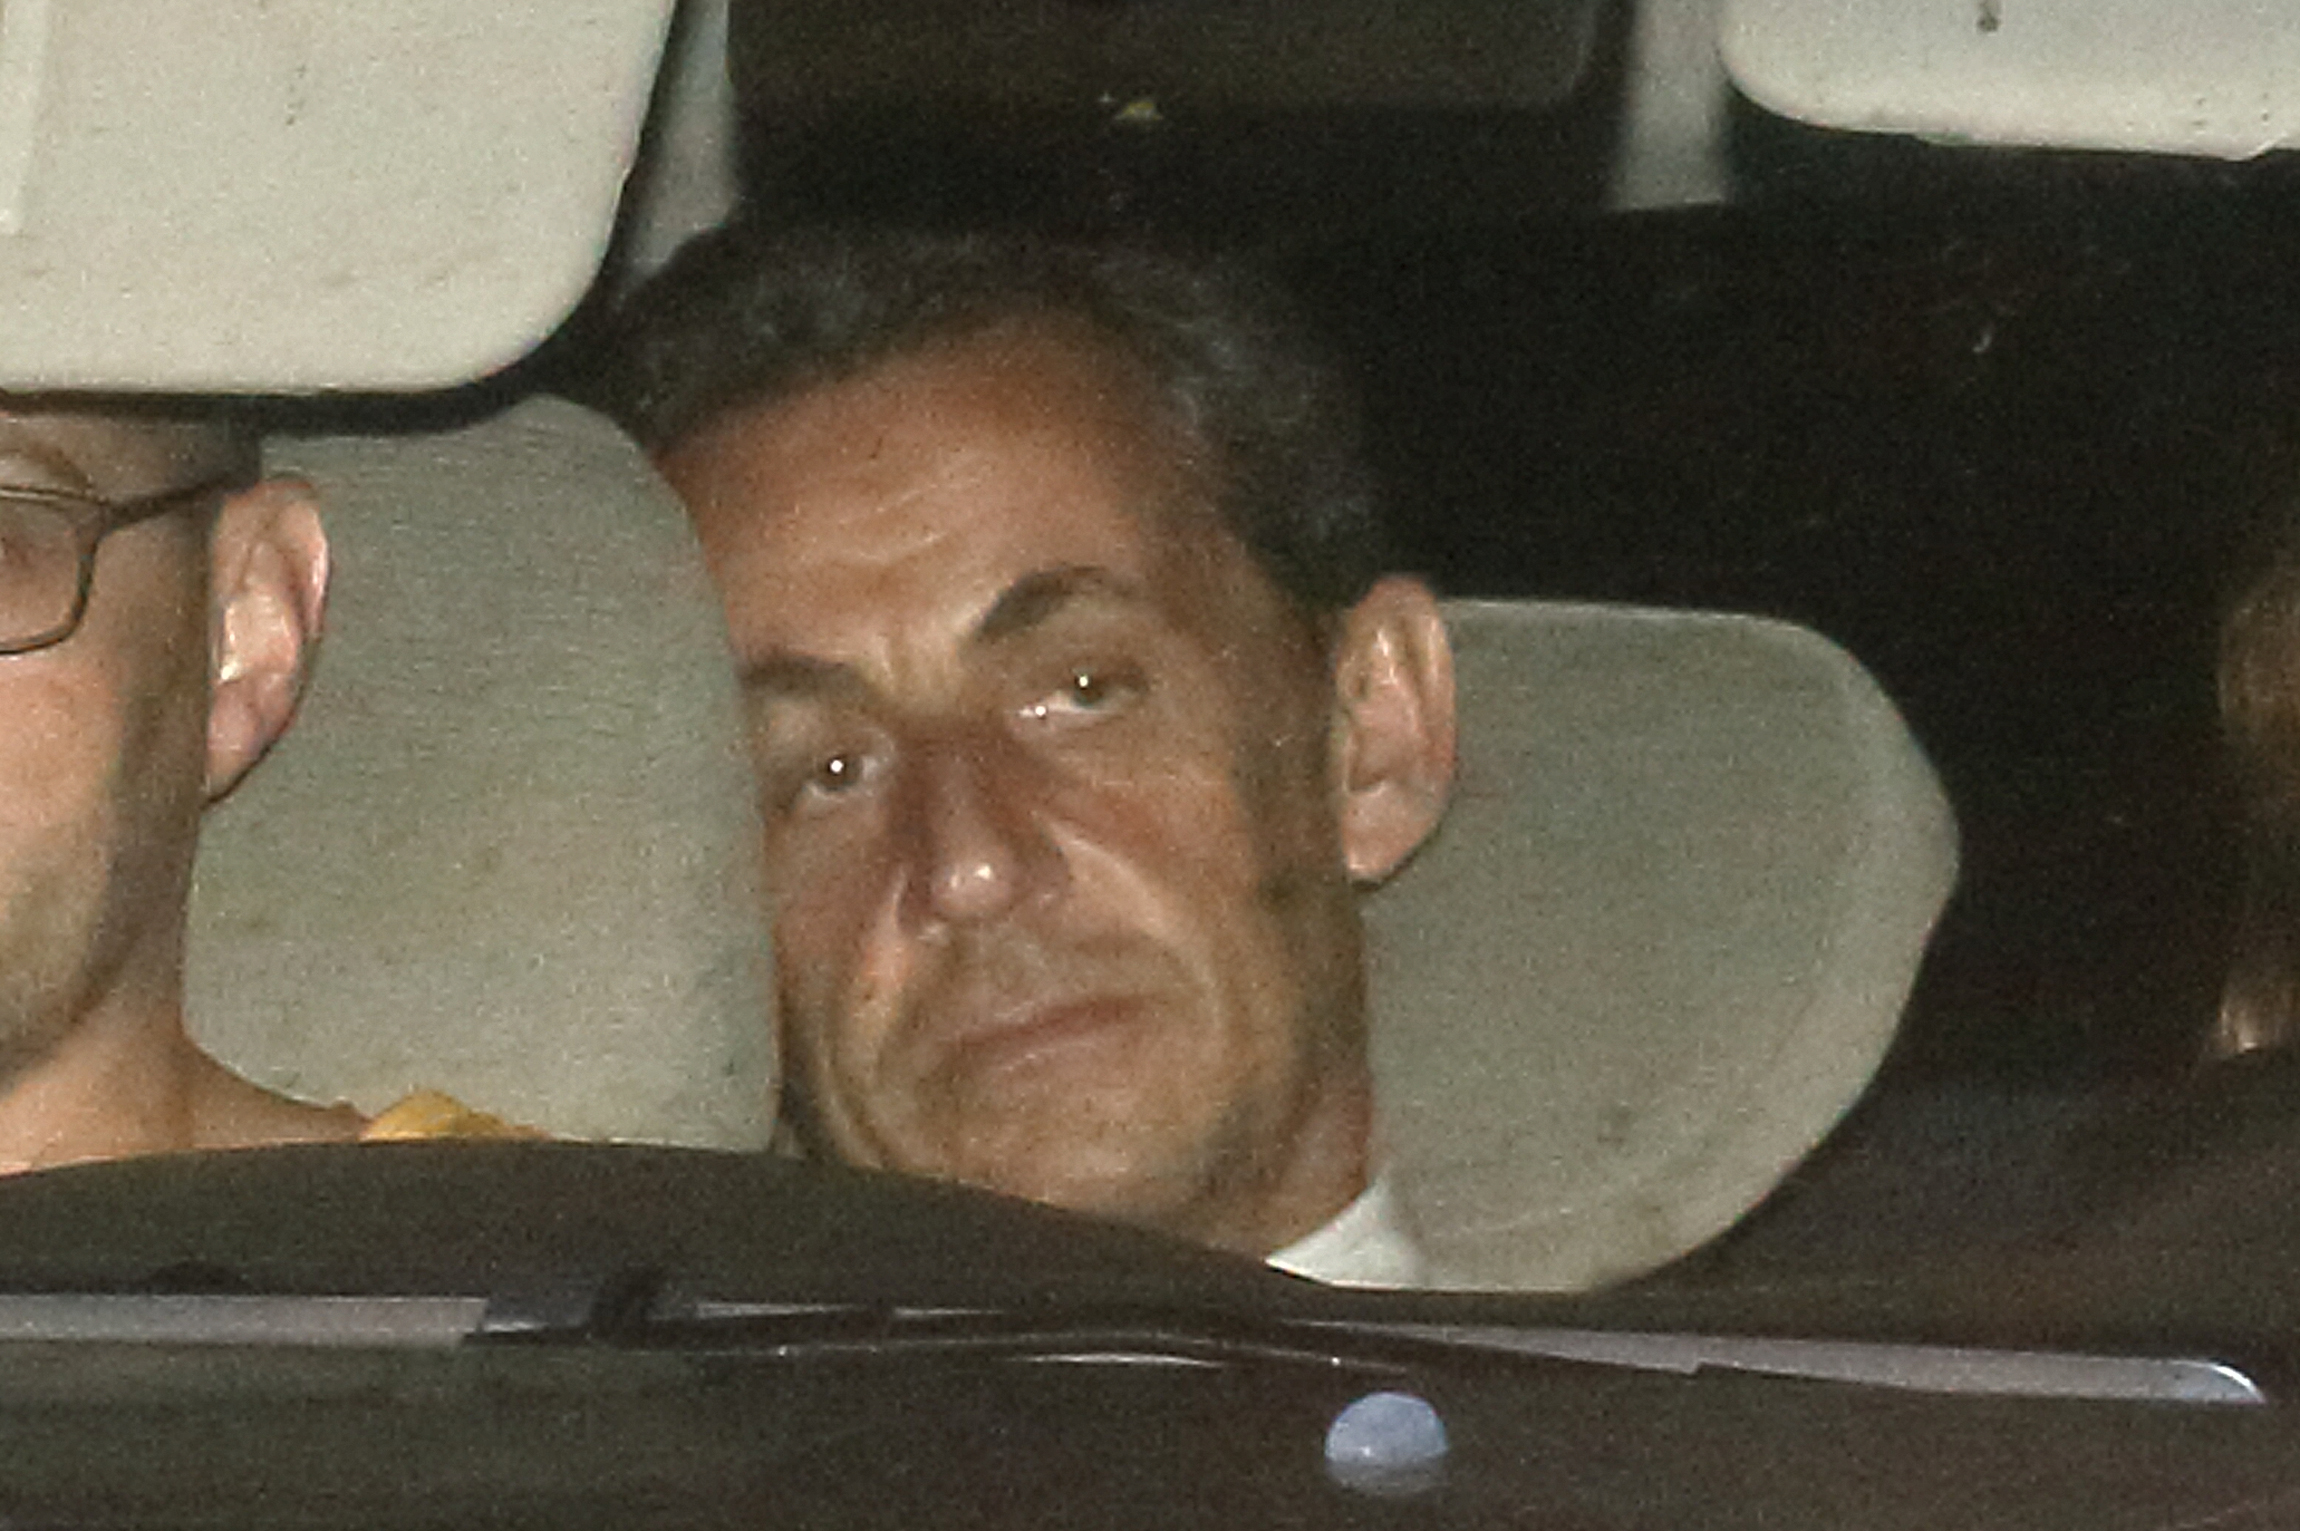 Former French President Nicolas Sarkozy arrives with police by car at the financial investigation unit in Paris to be presented to a judge